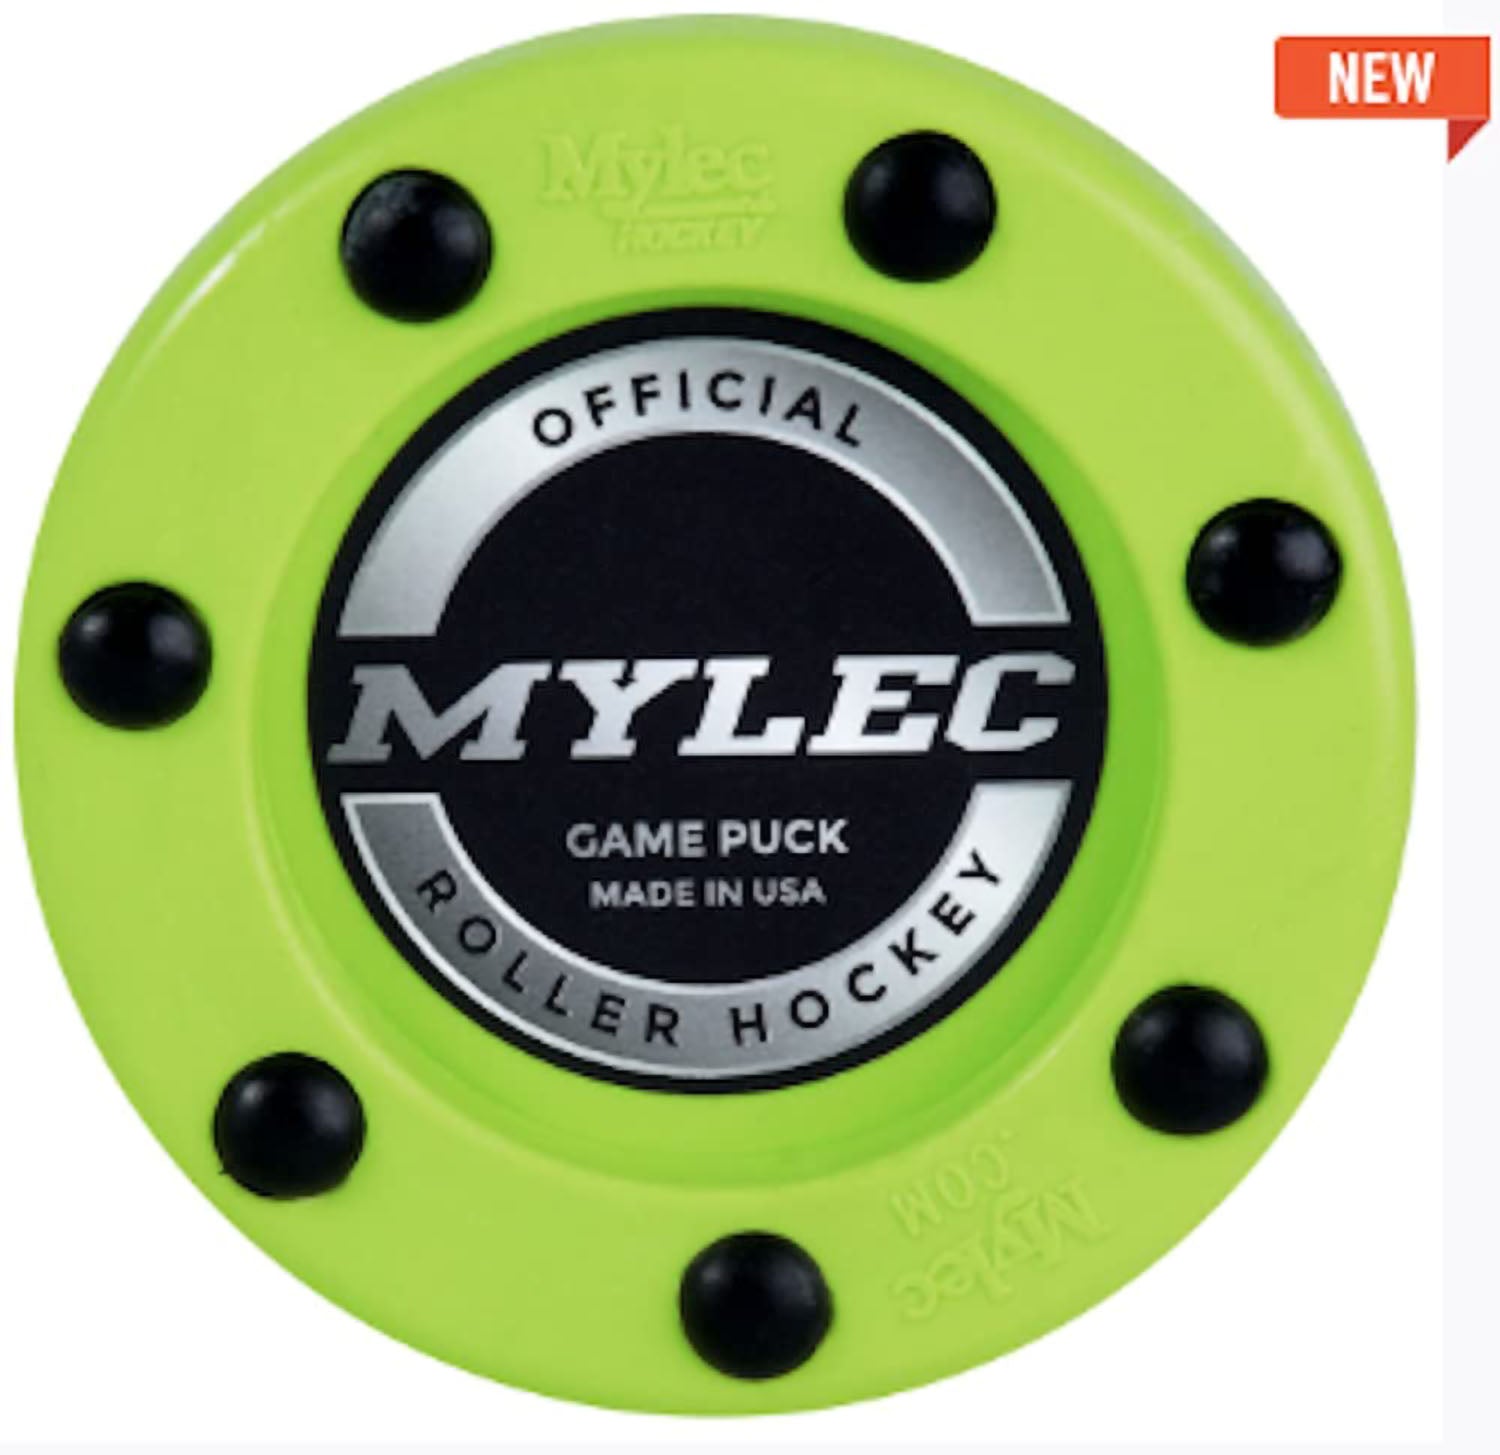 Mylec Green Official Roller Hockey Game Puck - 3 Pack - Pro-Distributing